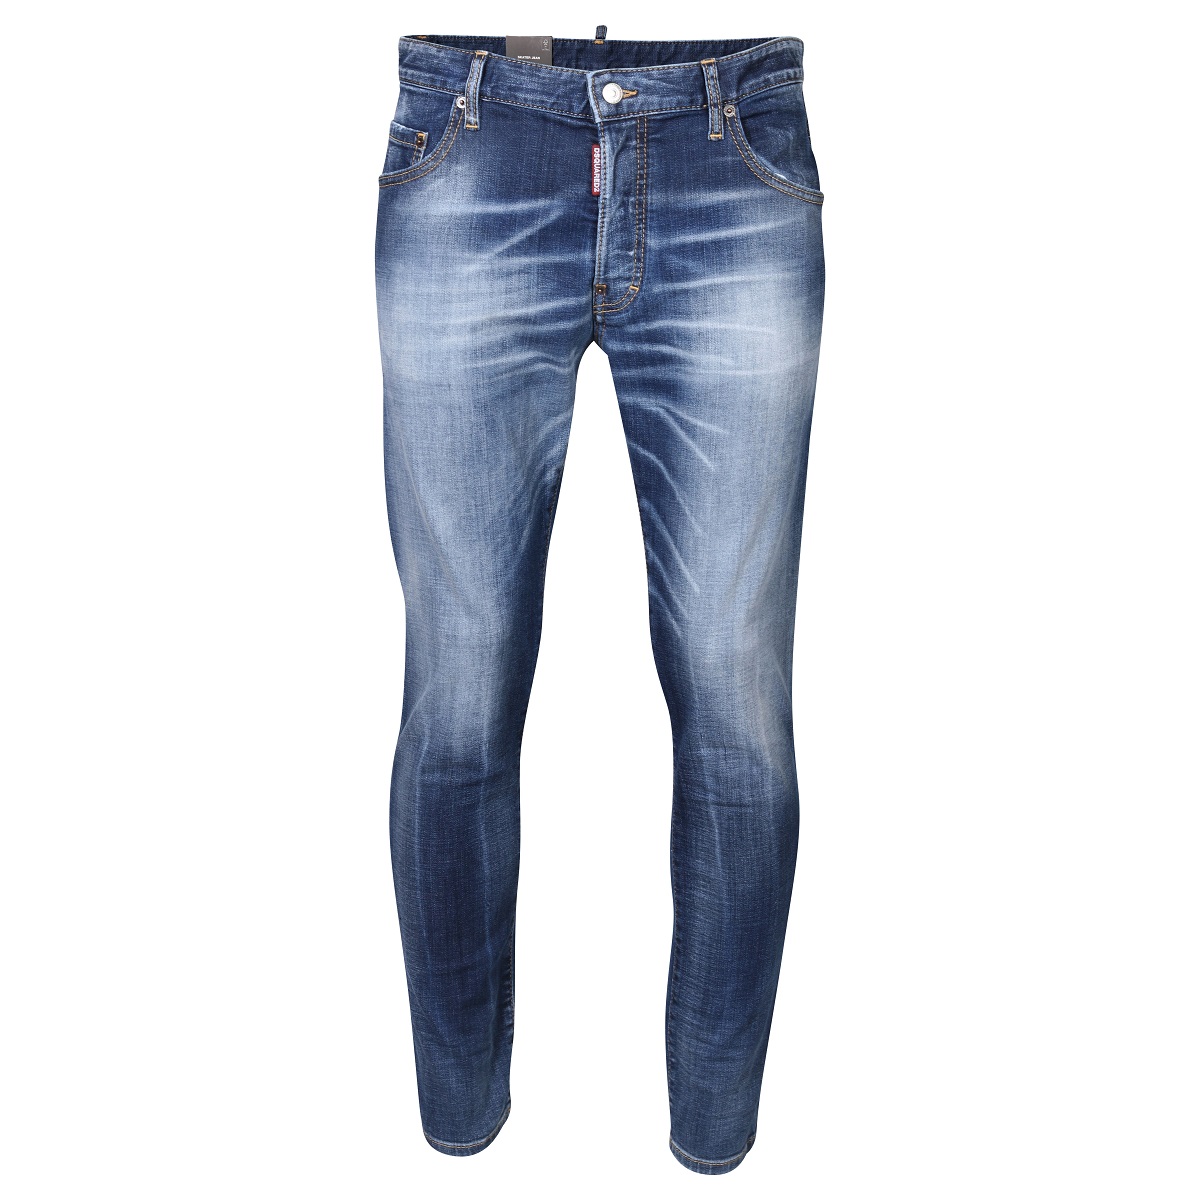 DSQUARED2 Jeans Skater in Washed Blue 56